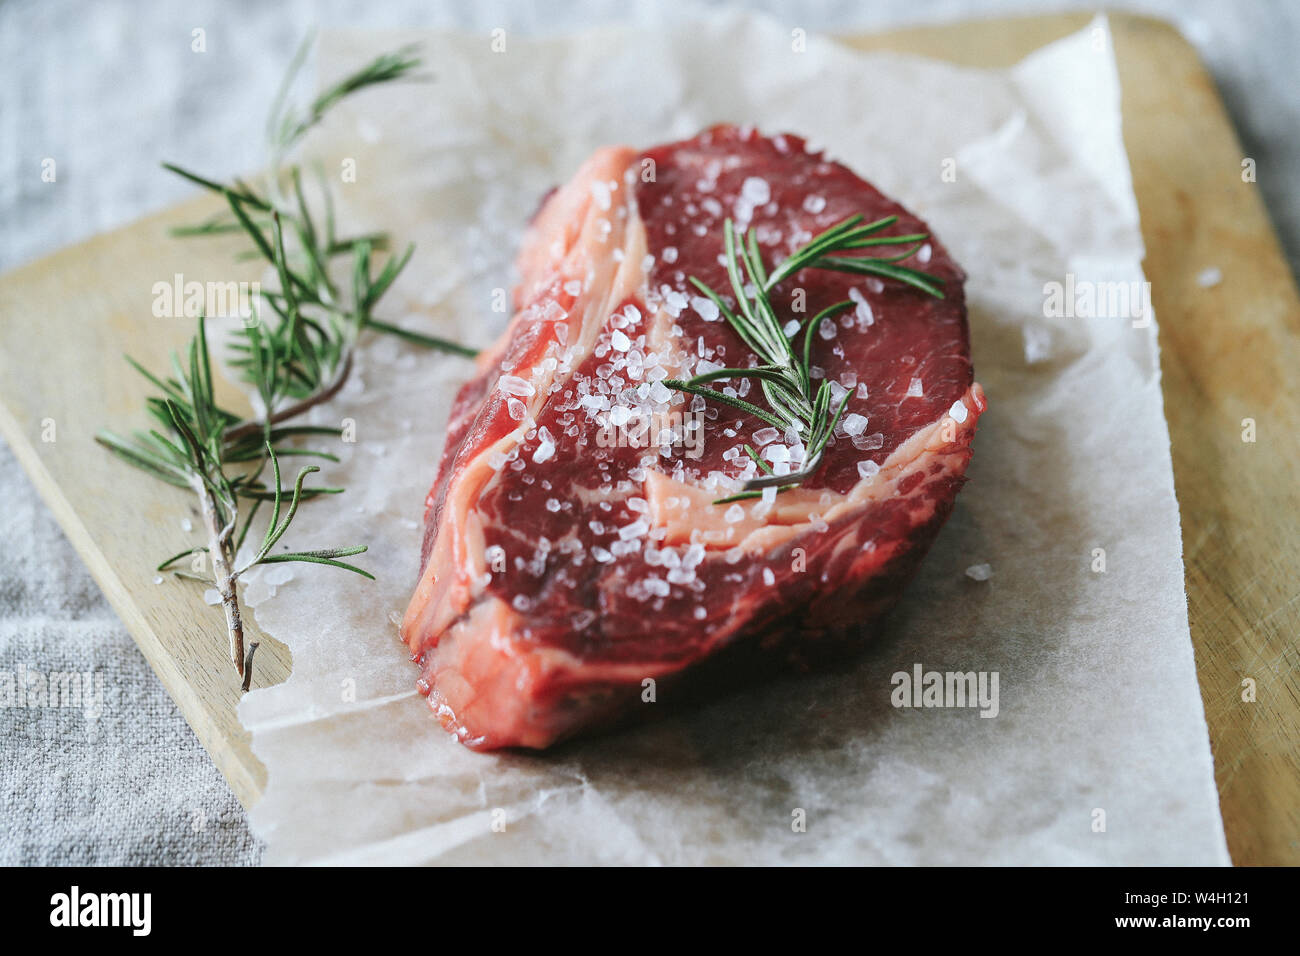 Cooking, meat preparation. Raw steak on the table Stock Photo